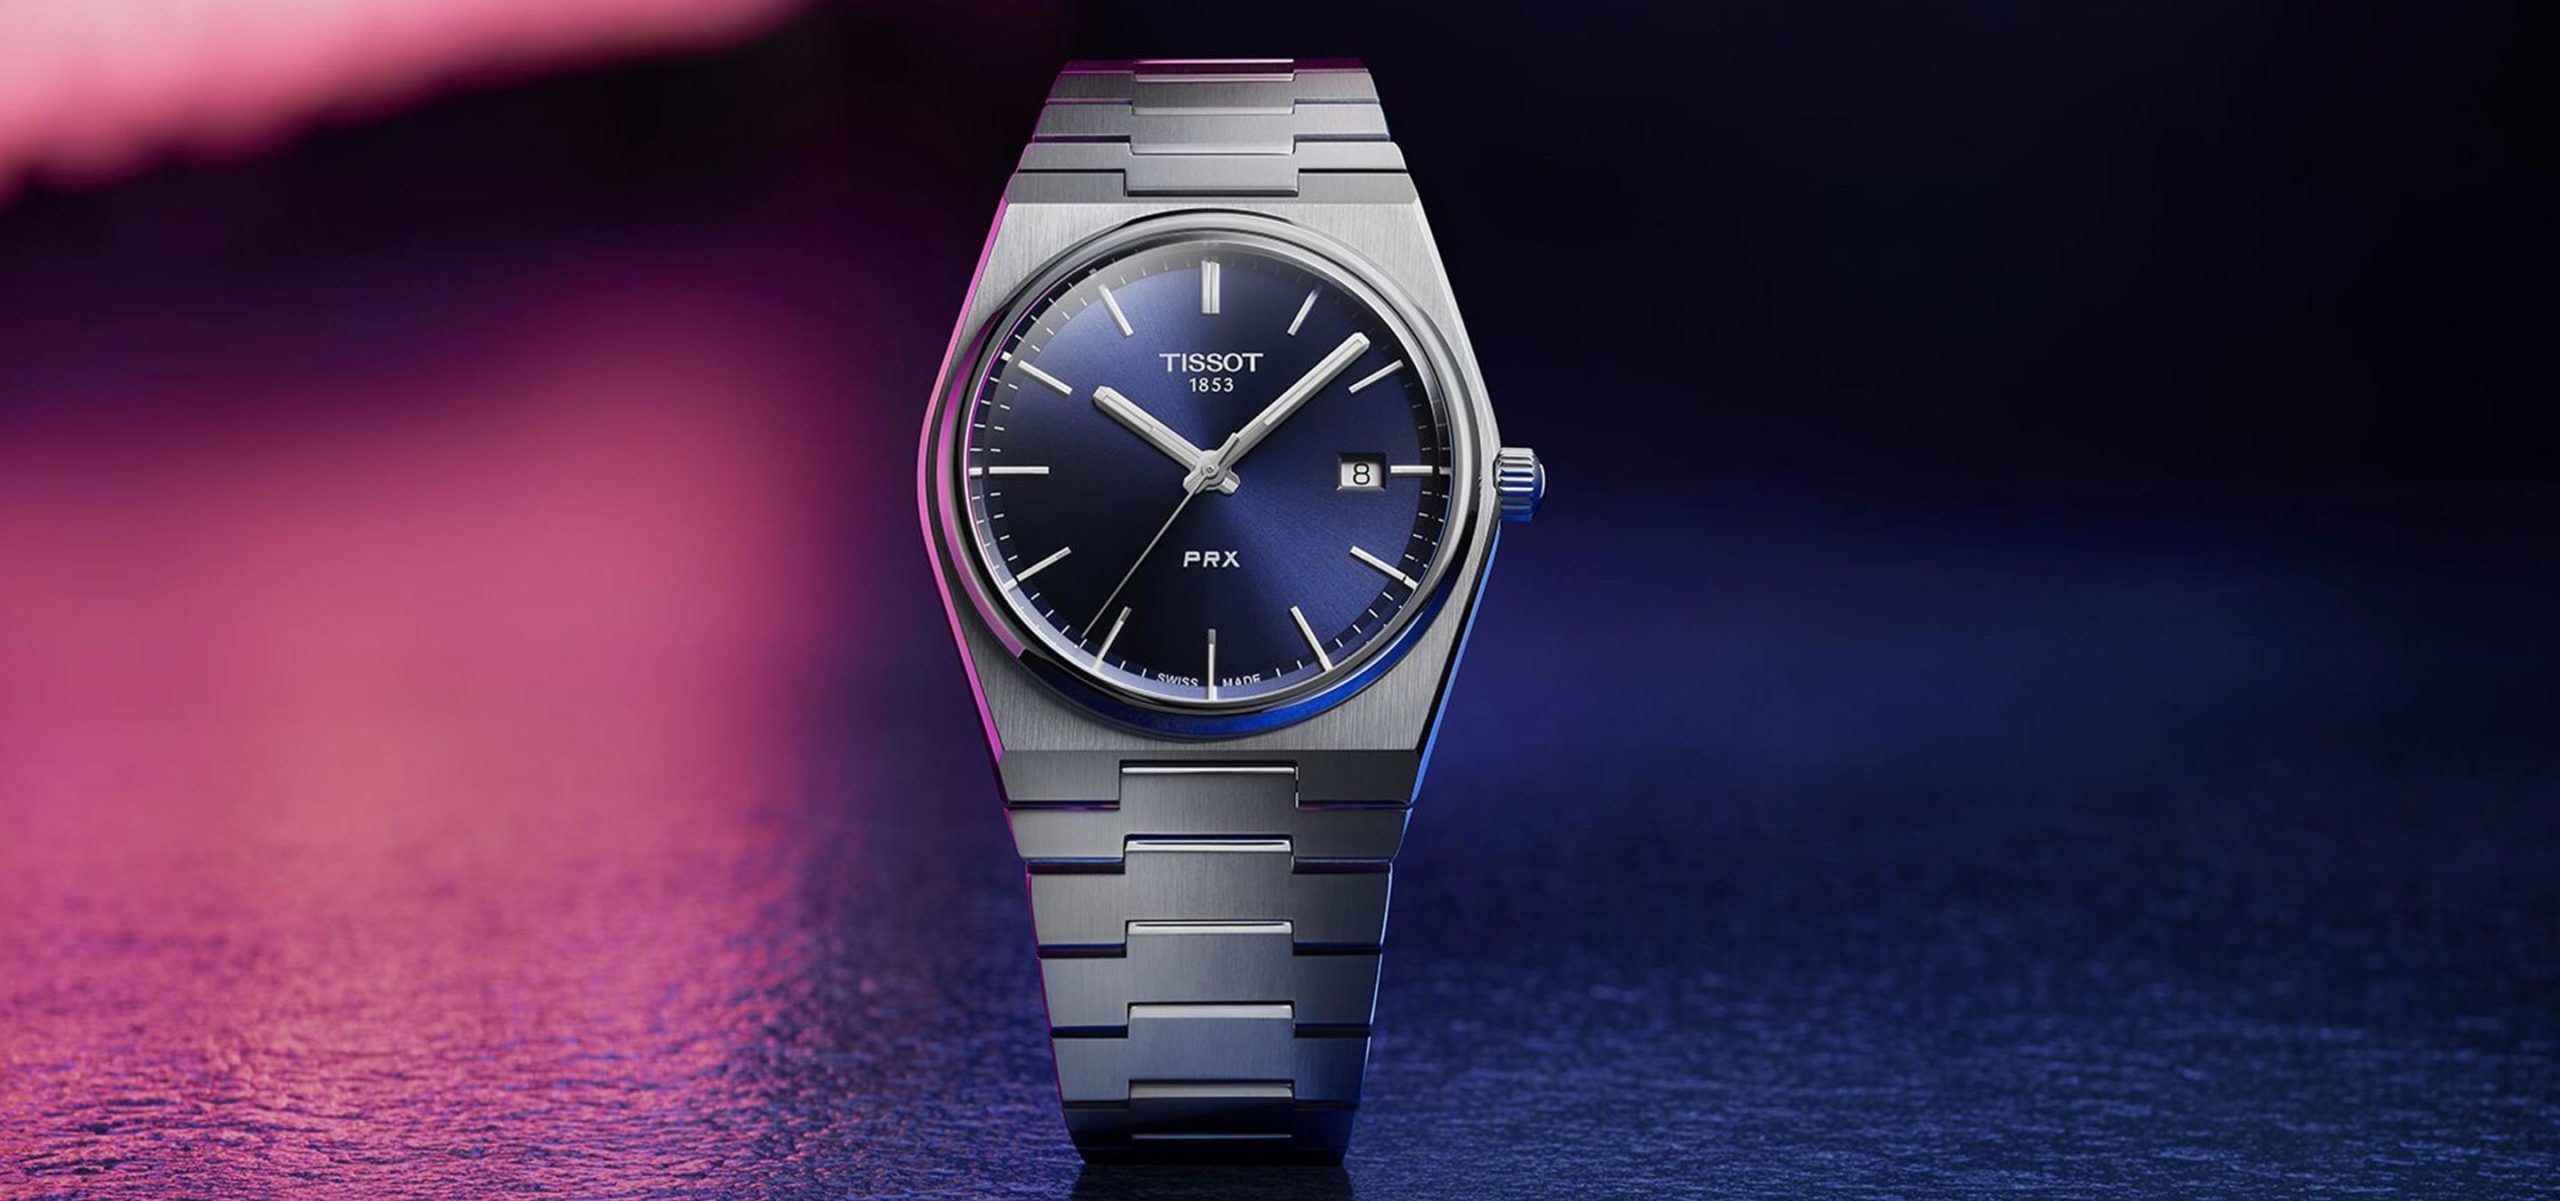 The Gateway Drug: Tissot’s PRX Quartz Timepieces In New Colors And Sizes